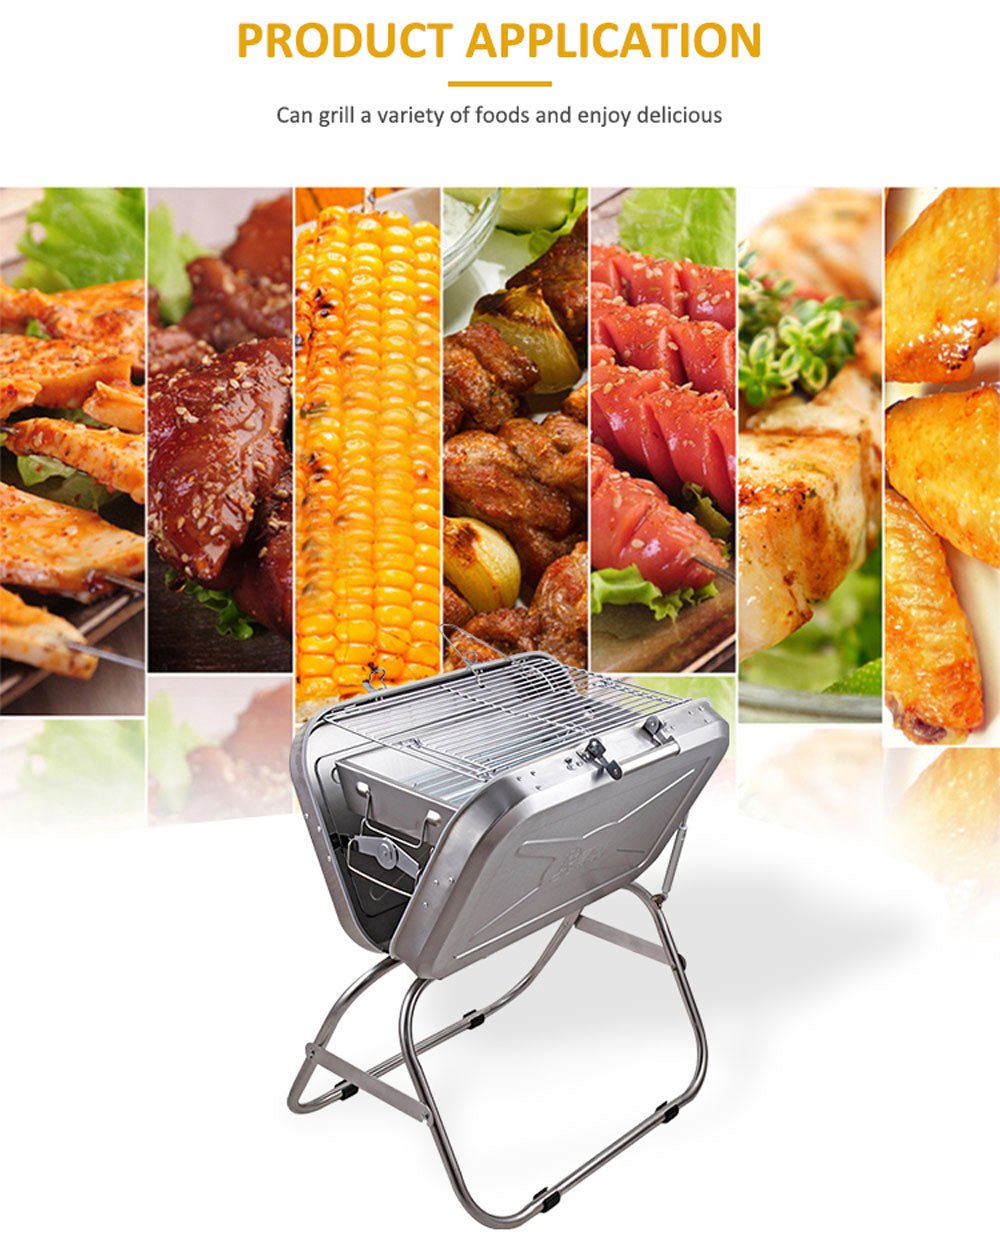 CRONY 8828 Portable grill Folding Stainless Steel Commercial Portable Outdoor Camping Charcoal Bbq Grill - Edragonmall.com